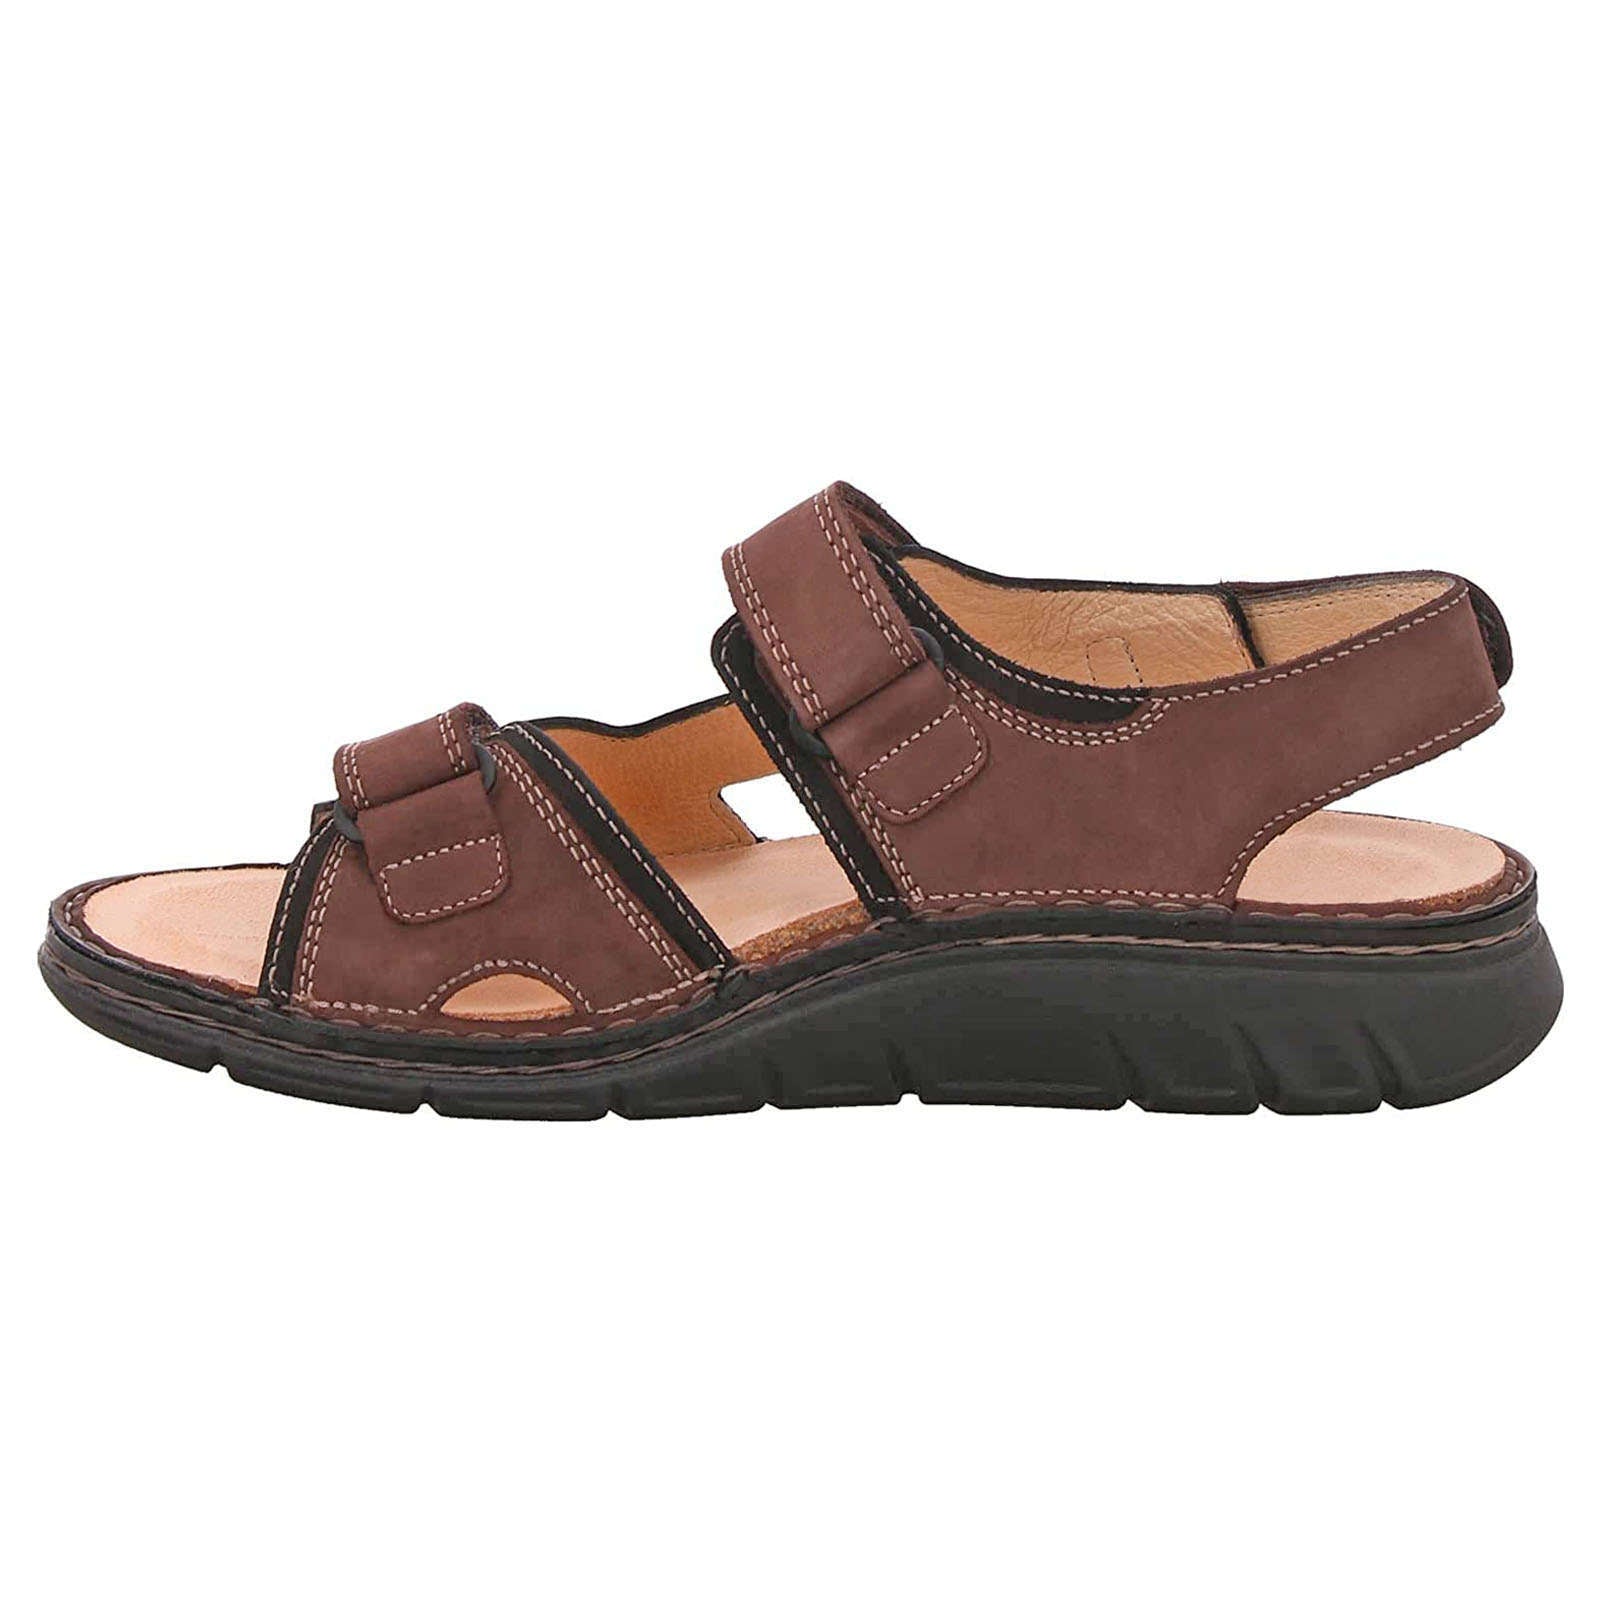 Finn Comfort Wanaka-S Nubuck Leather Unisex Sandals#color_grizzly black